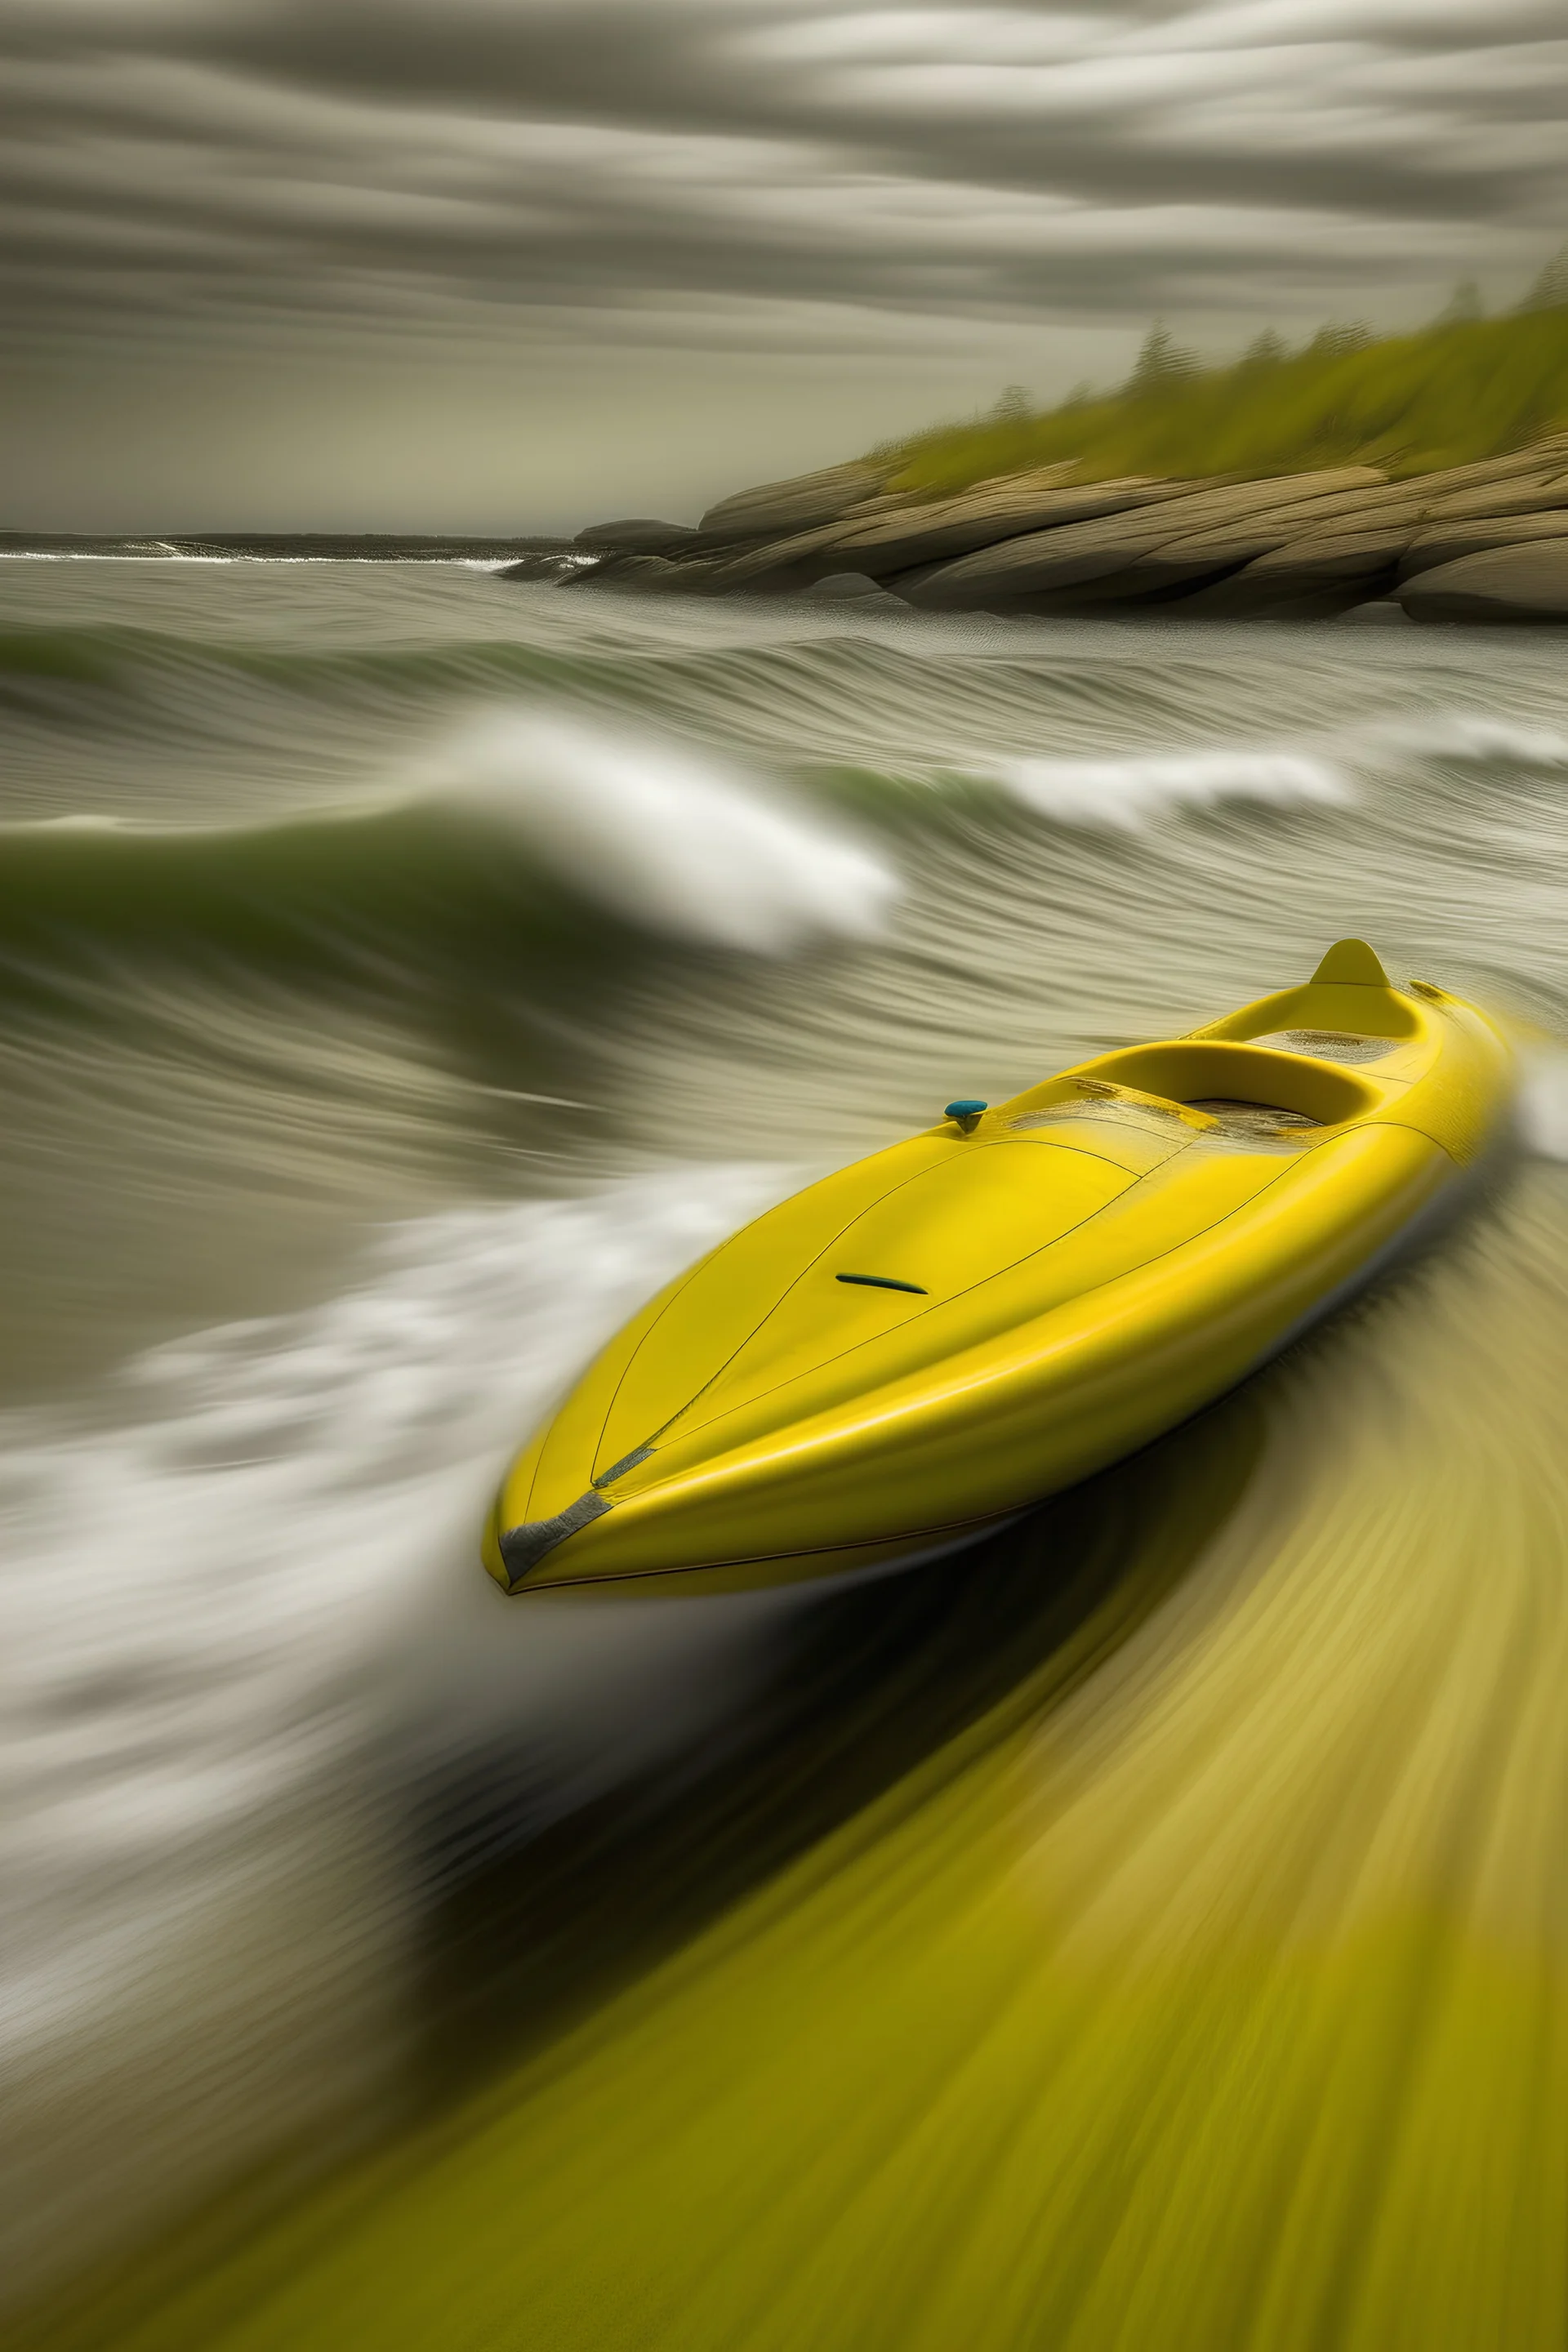 The Kayak By Debbie Spring The choppy waves rise and fall. I ride the wave. My kayak bobs like a cork in the swirling waters of Georgian Bay. I love it. I feel wild and free. The wind blows my hair into my eyes. I concentrate on my balance. It’s more difficult now. I stop stroking with my double-bladed paddle and push my bangs from my face. This is my special place. Out here, I feel safe and secure. My parents watch from the shore. I have on my life jacket and emergency whistle. I am one wit